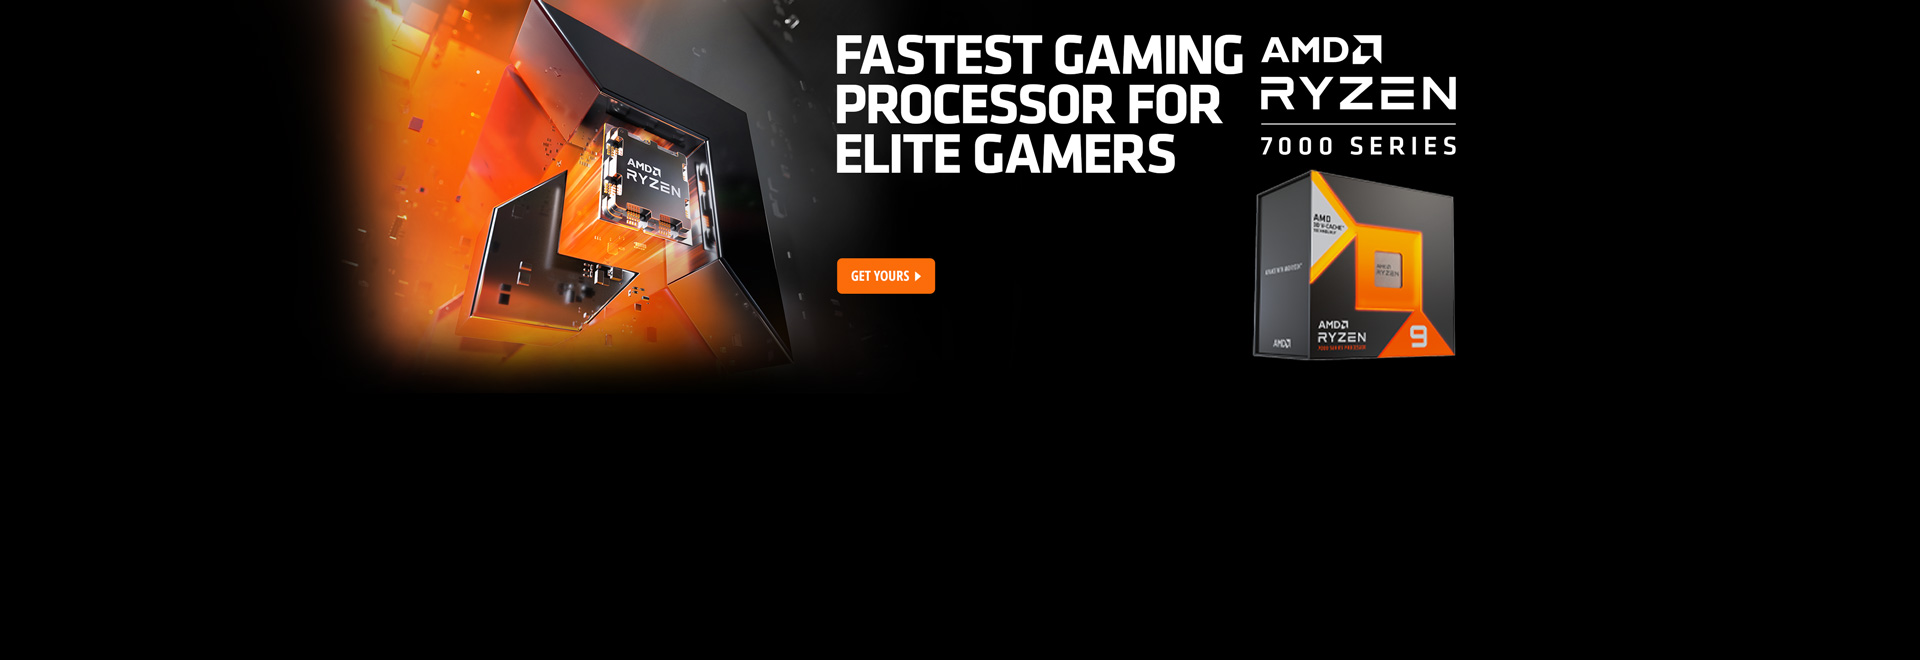 Fastest gaming processor for elite gamers